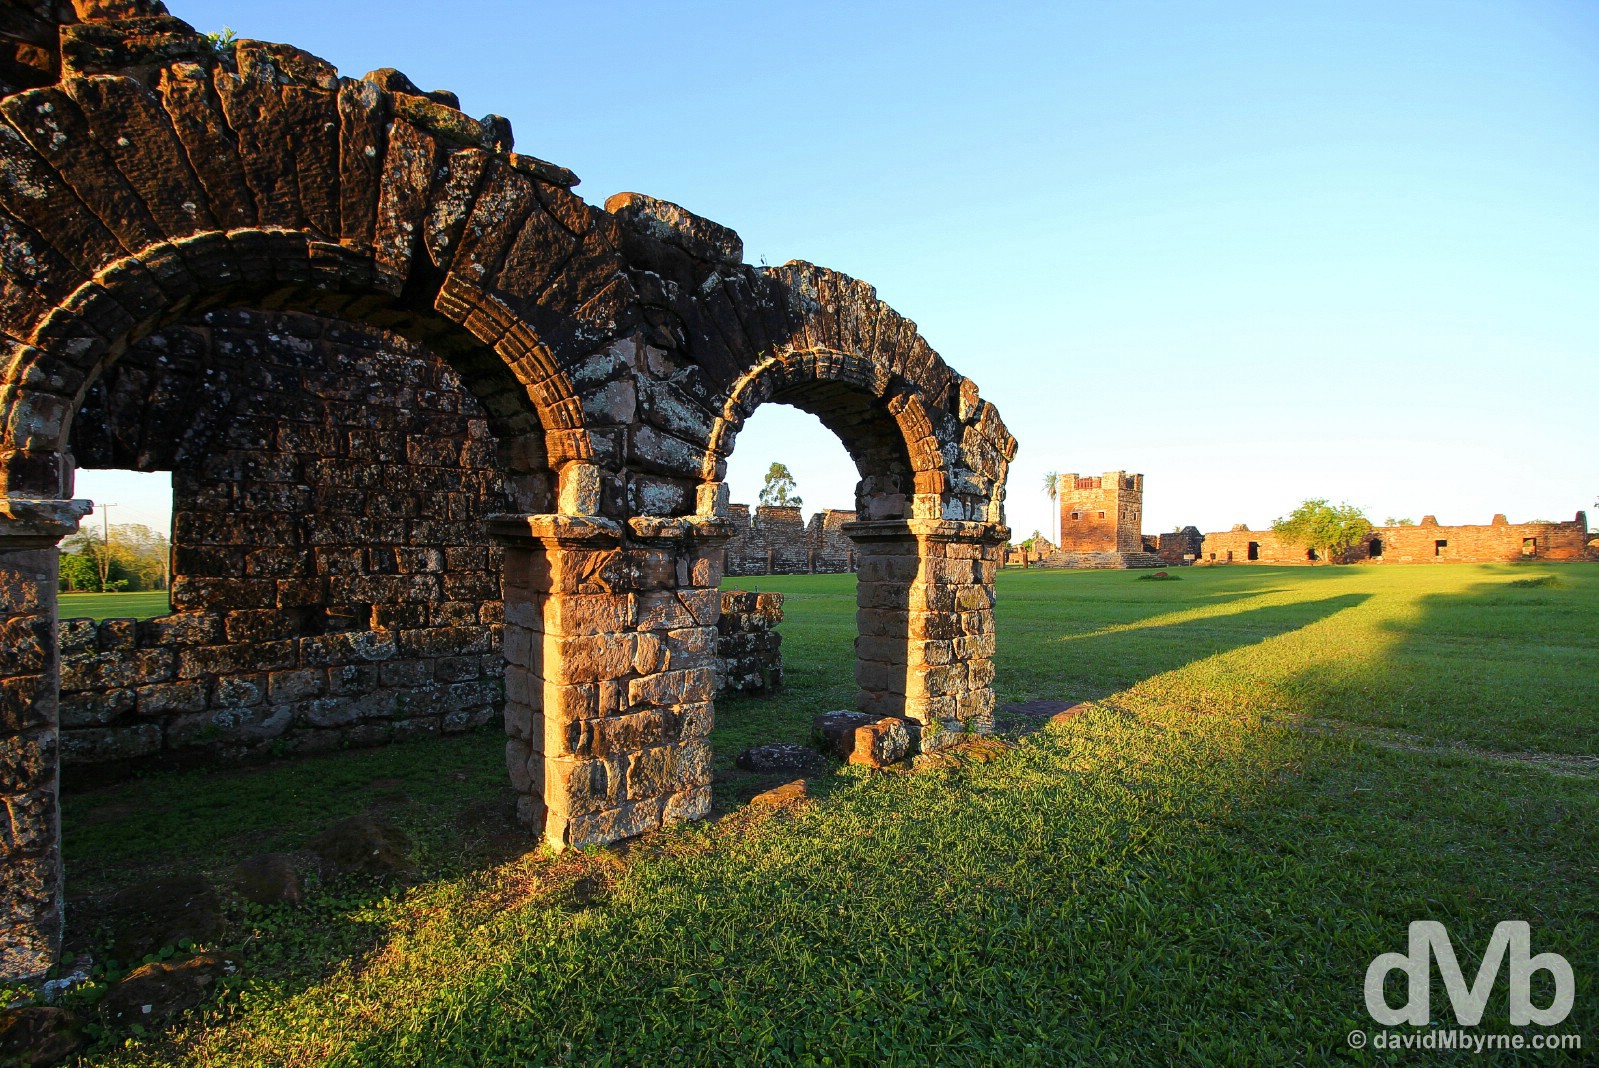 Sunset in the grounds of the UNESCO-listed Jesuit Mission of La Santísima Trinidad de Paraná, southern Paraguay. September 14, 2015.